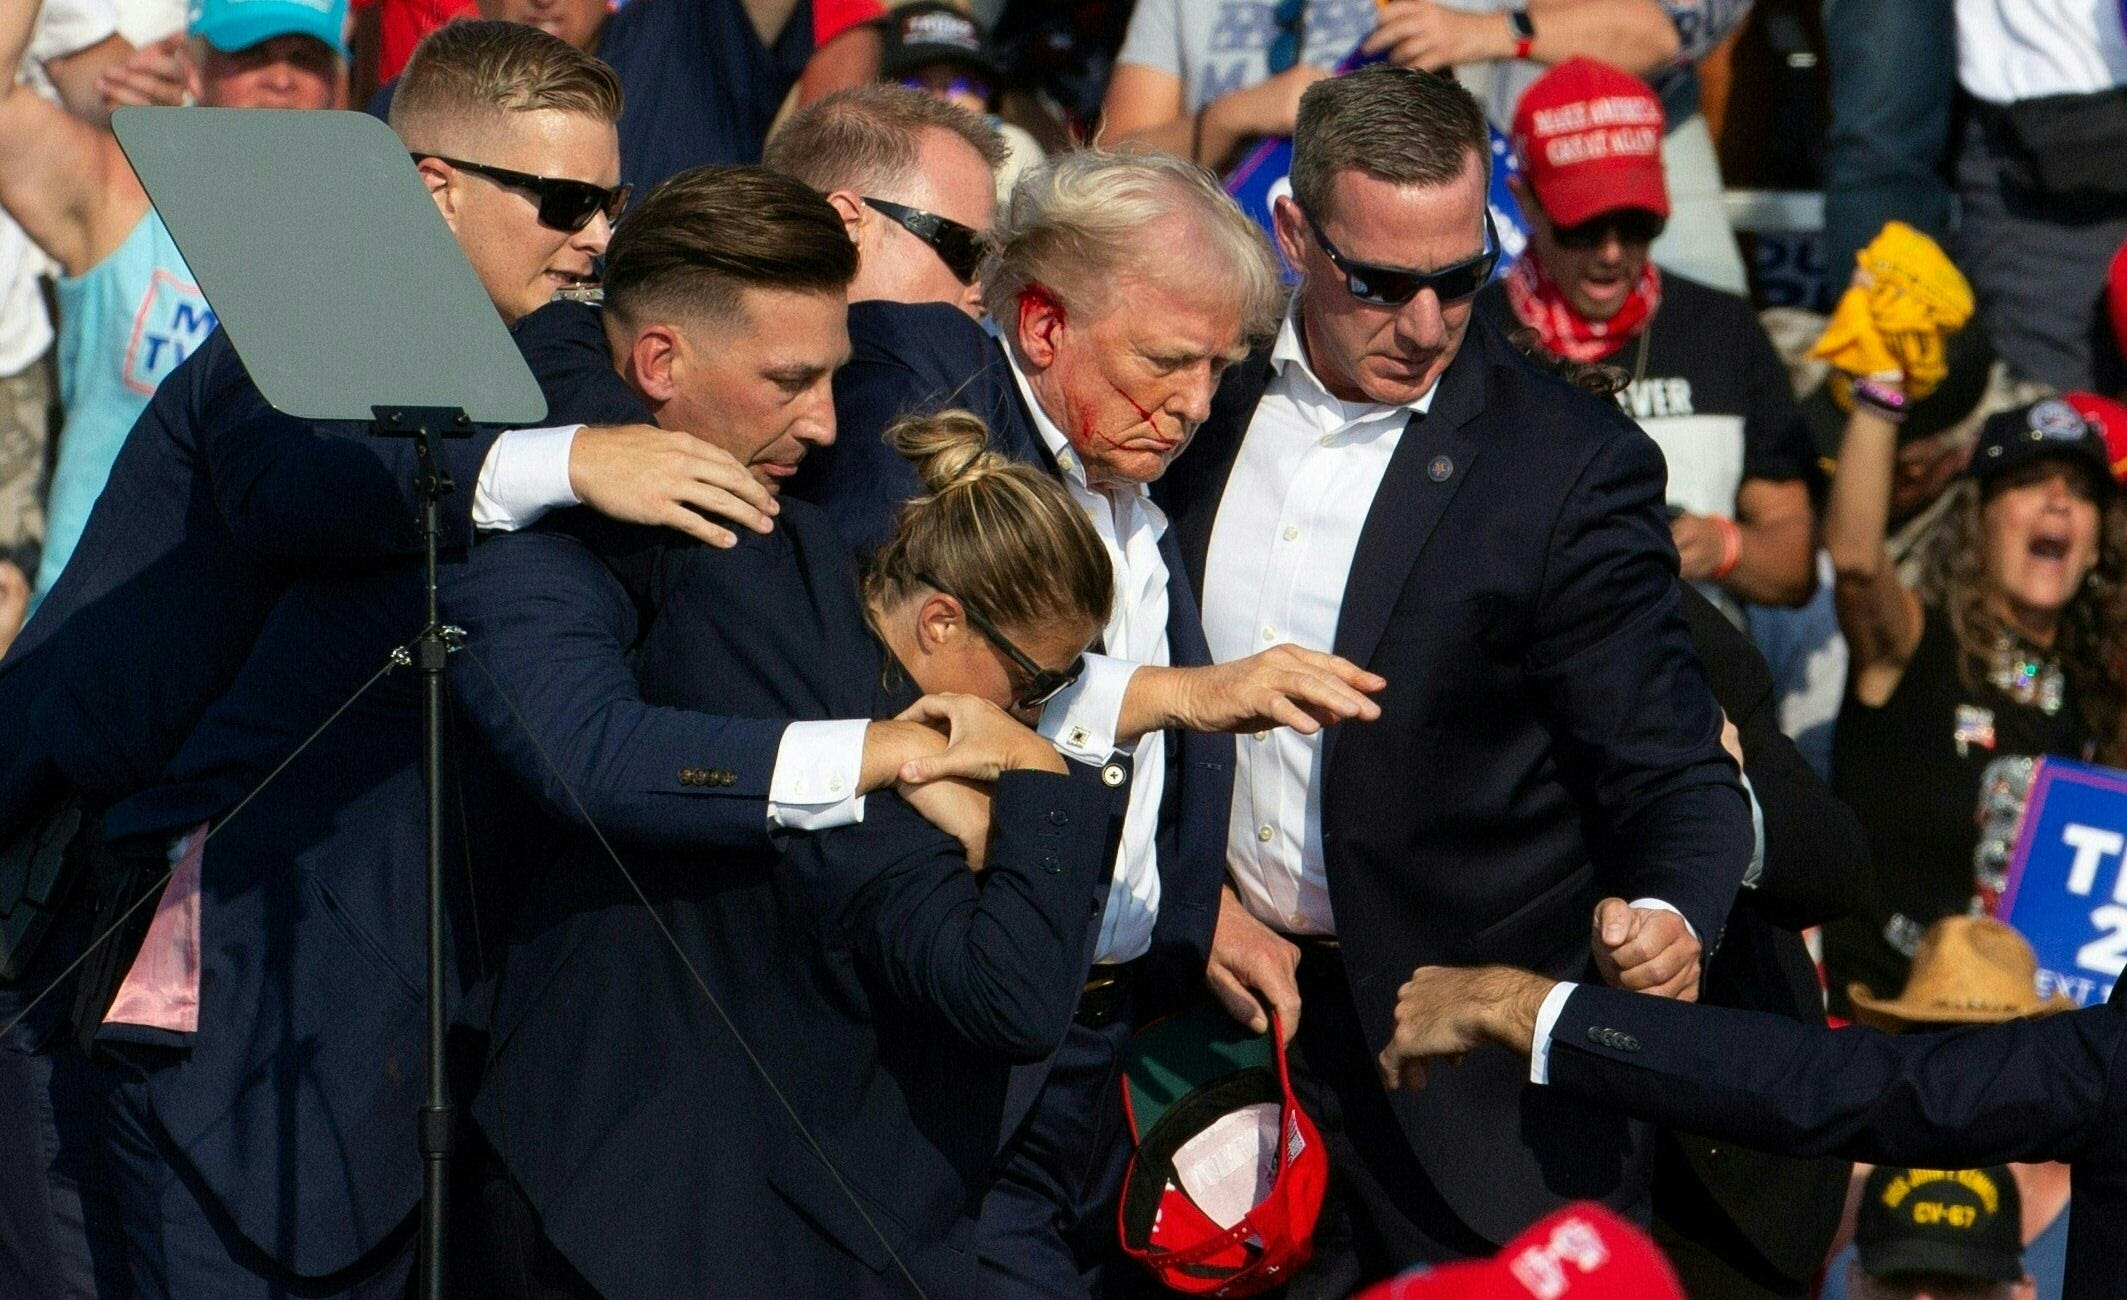 Facts about Trump assassination attempt: What's real, what's not and how we know